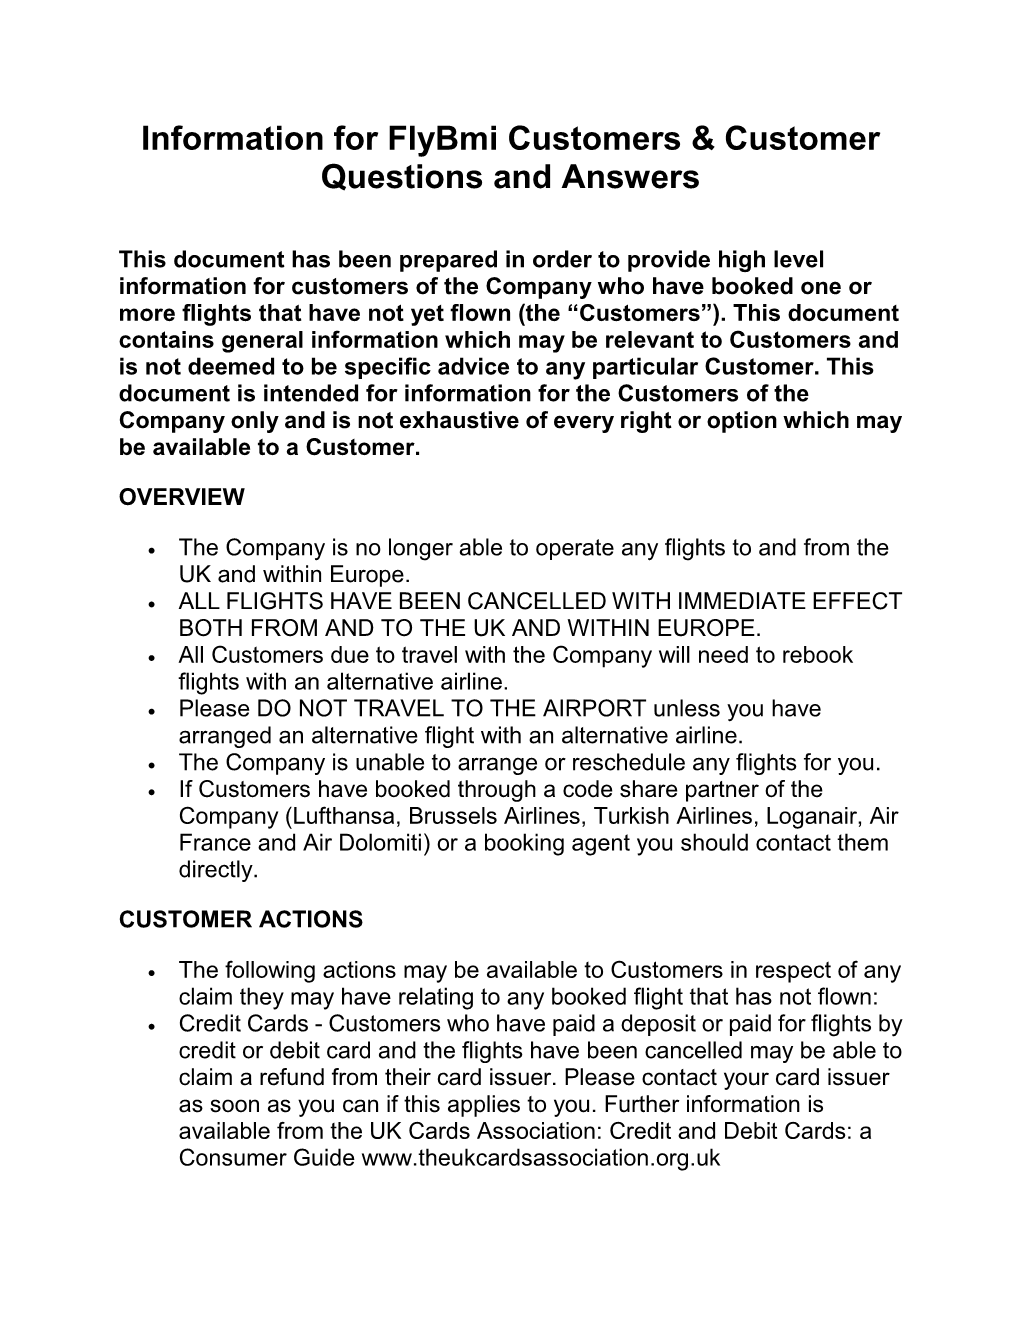 Information for Flybmi Customers & Customer Questions and Answers